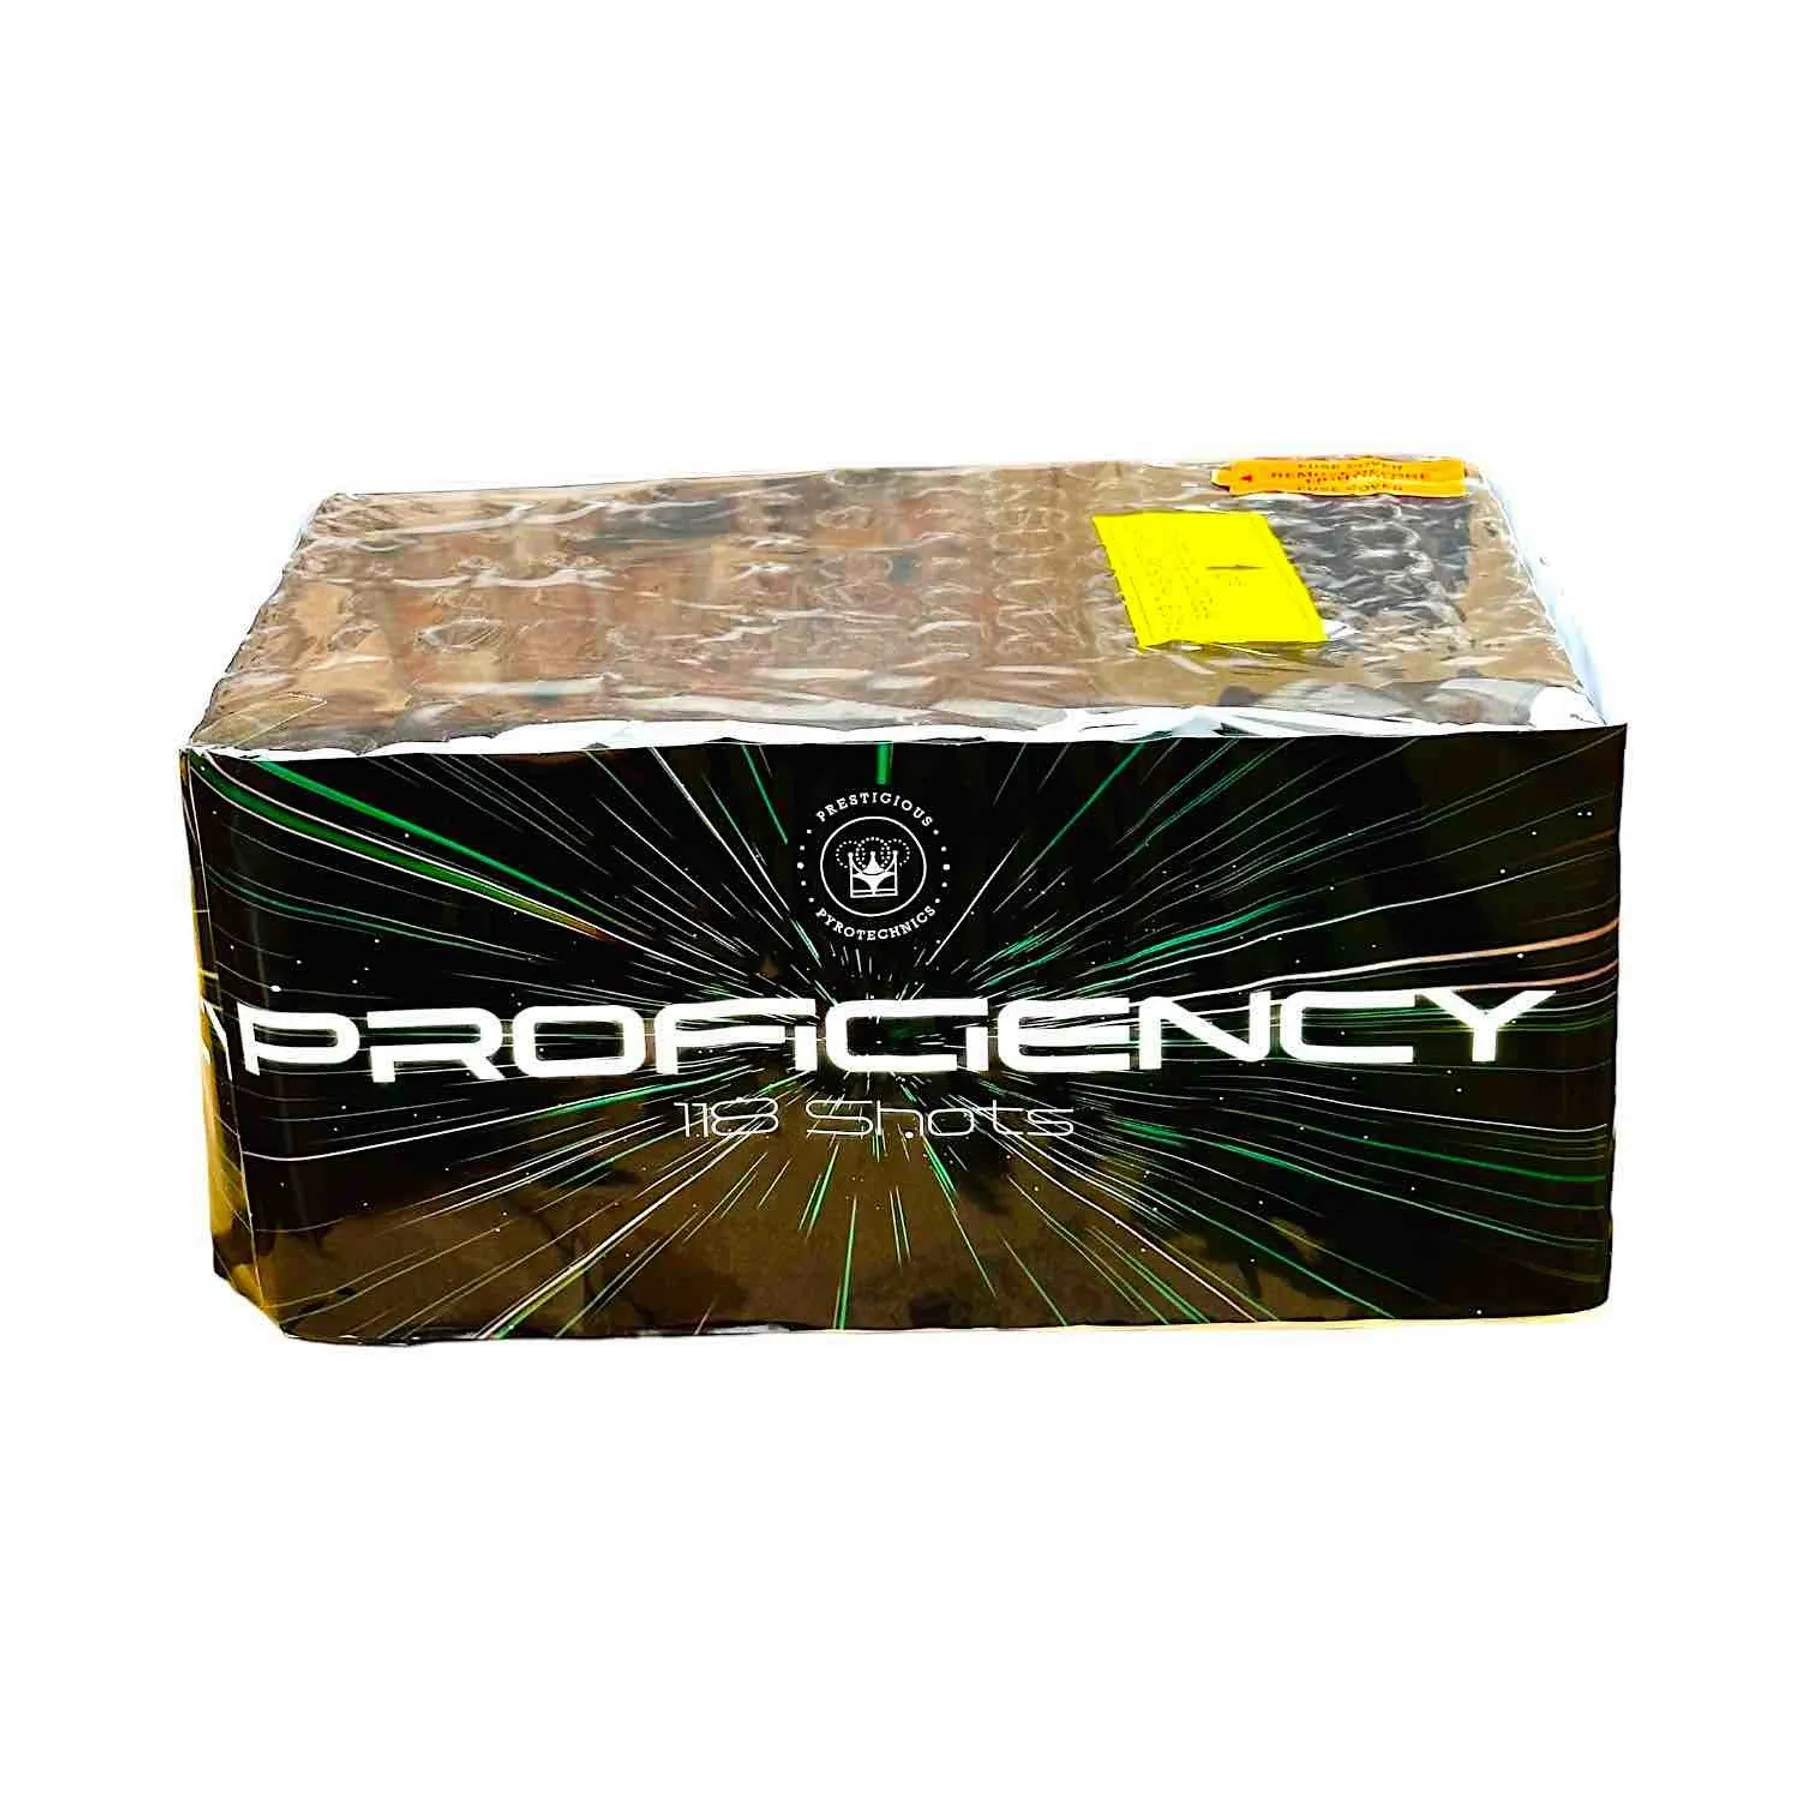 A great one light firework that provides large bursts of colours with different effects